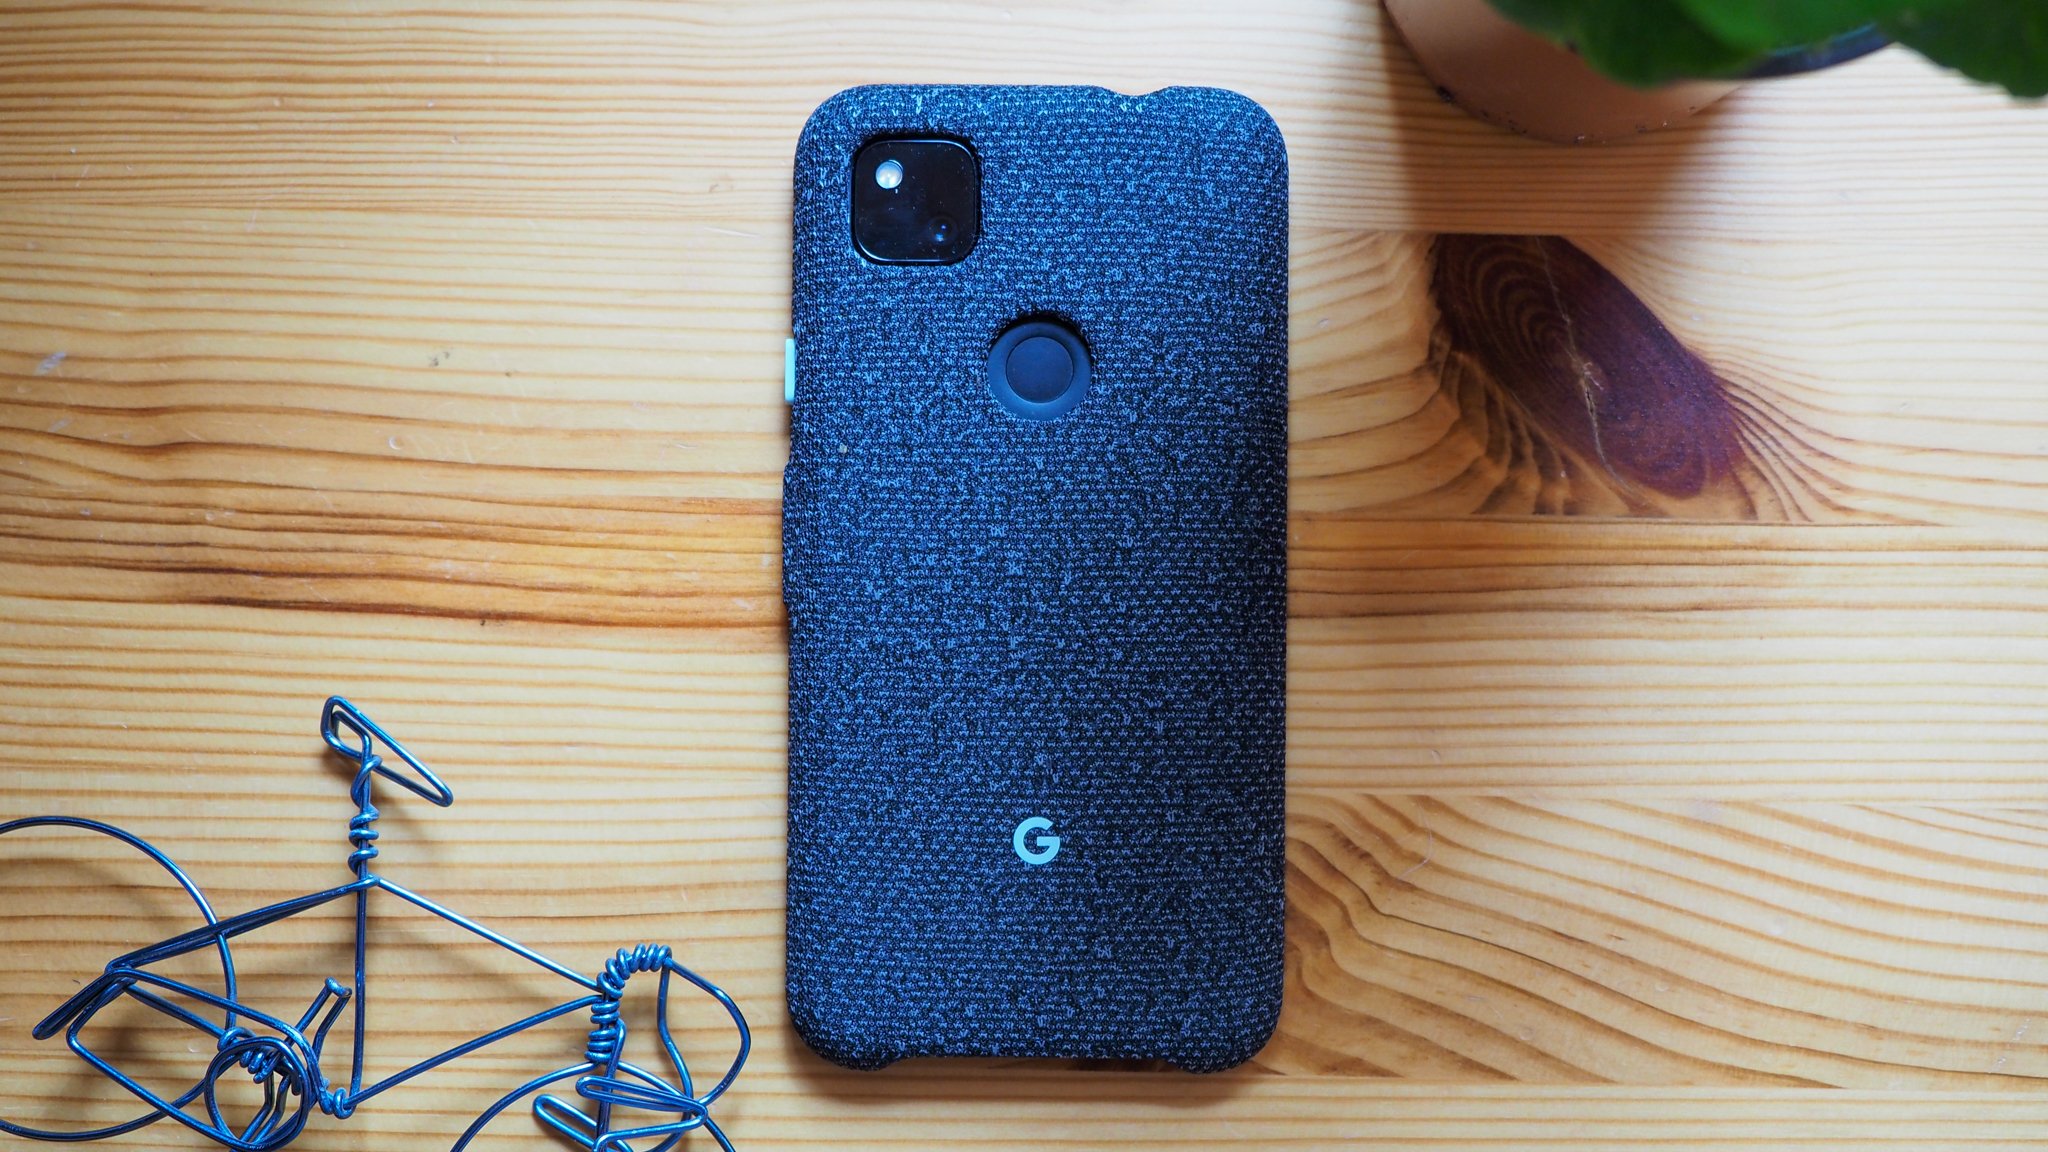 Best Google Pixel 4a Cases 2021 Android Central With the pixel 4a only launching in black at first, i can understand wanting to add some color without adding bulk. best google pixel 4a cases 2021